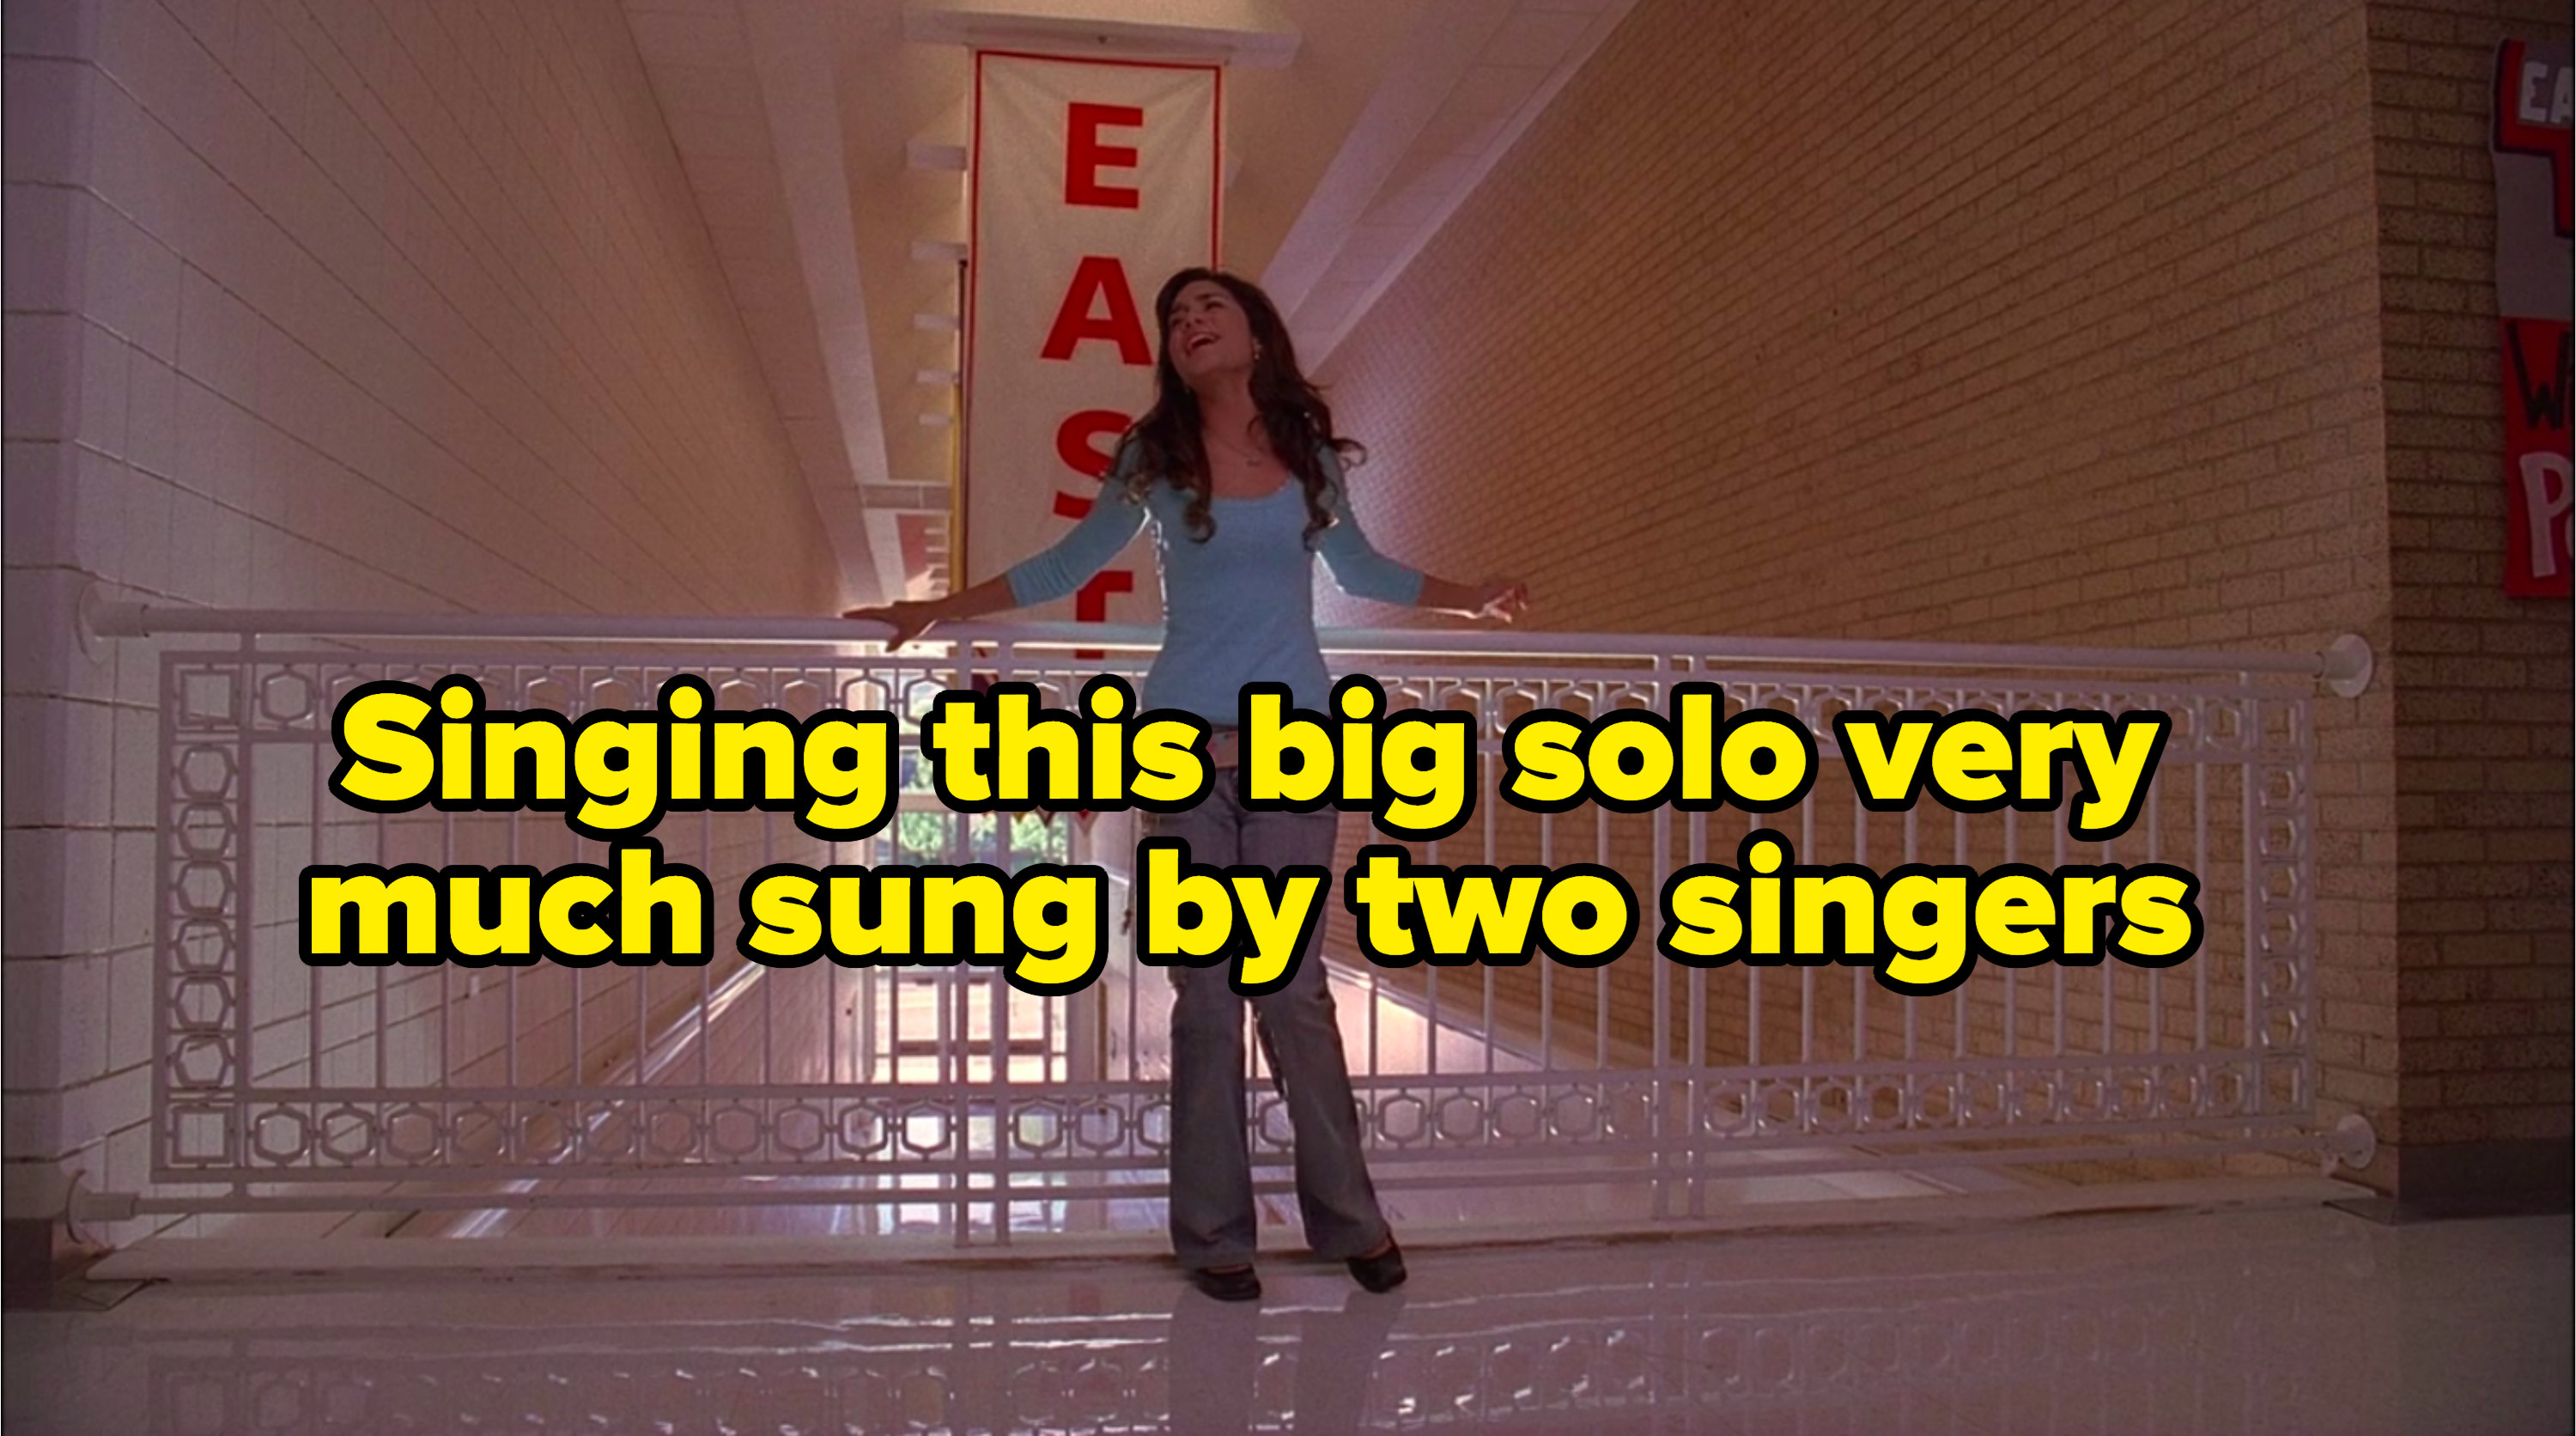 &quot;Singing this big solo very much sung by two singers&quot; written over Gabriella singing &quot;Where There Was me and You&quot;